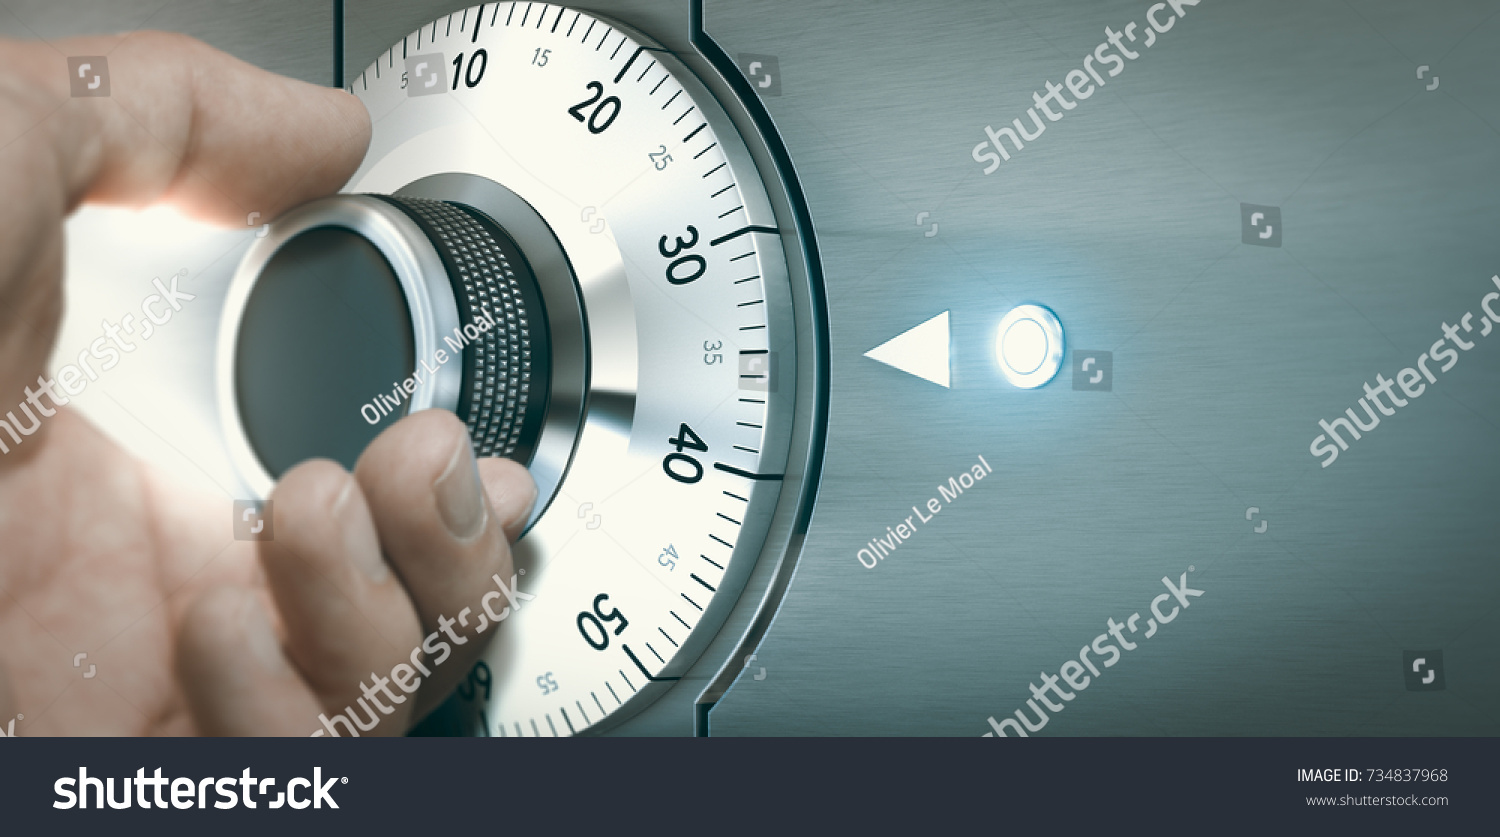 Close up of a hand unlocking a safe deposit box by turning a knob with numbers. Composite image between a hand photography and a 3D background. #734837968